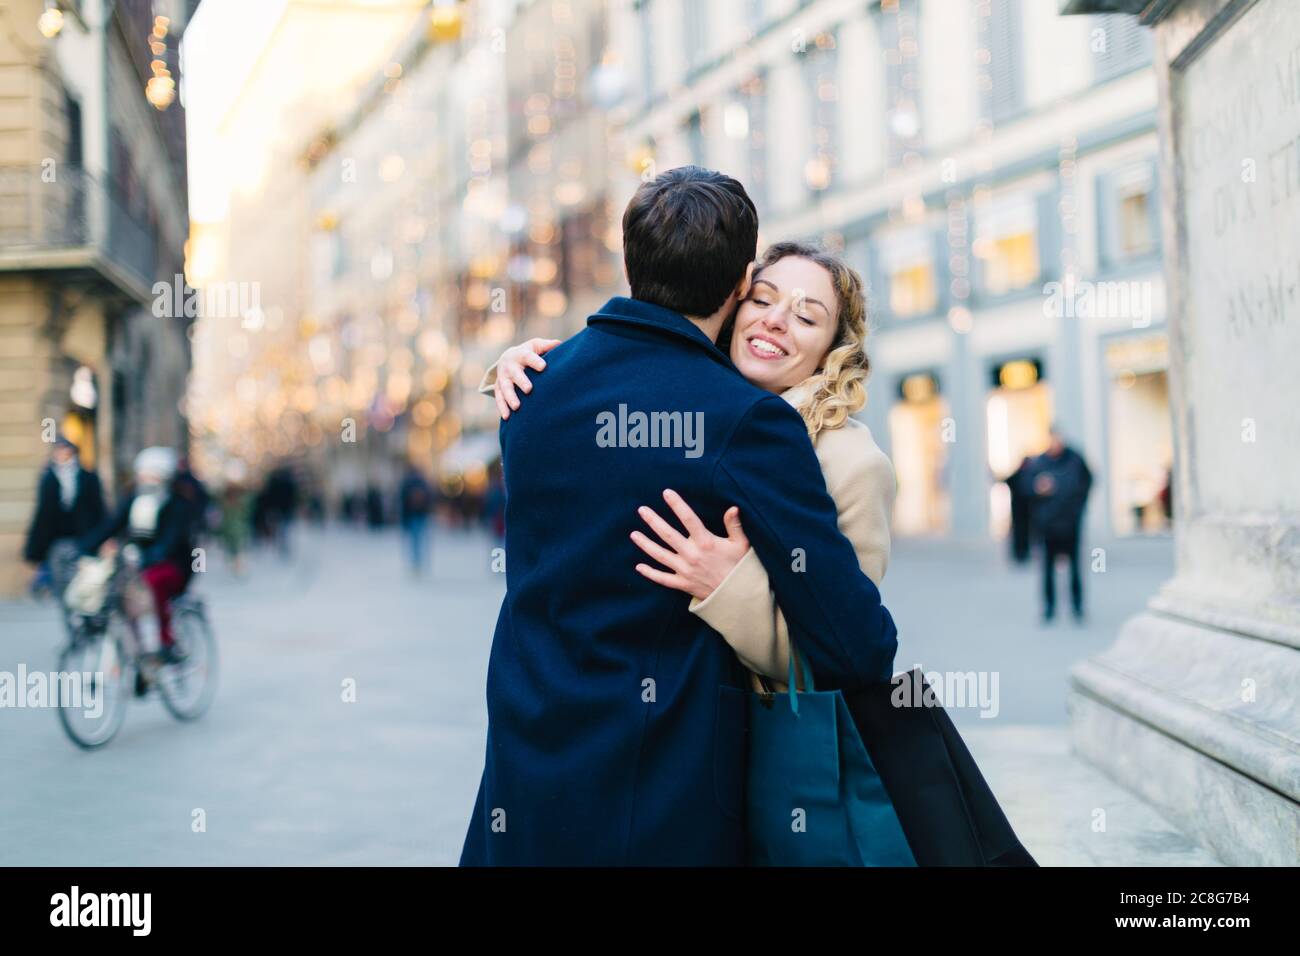 Couple hugging at piazza, Firenze, Toscana, Italy Stock Photo